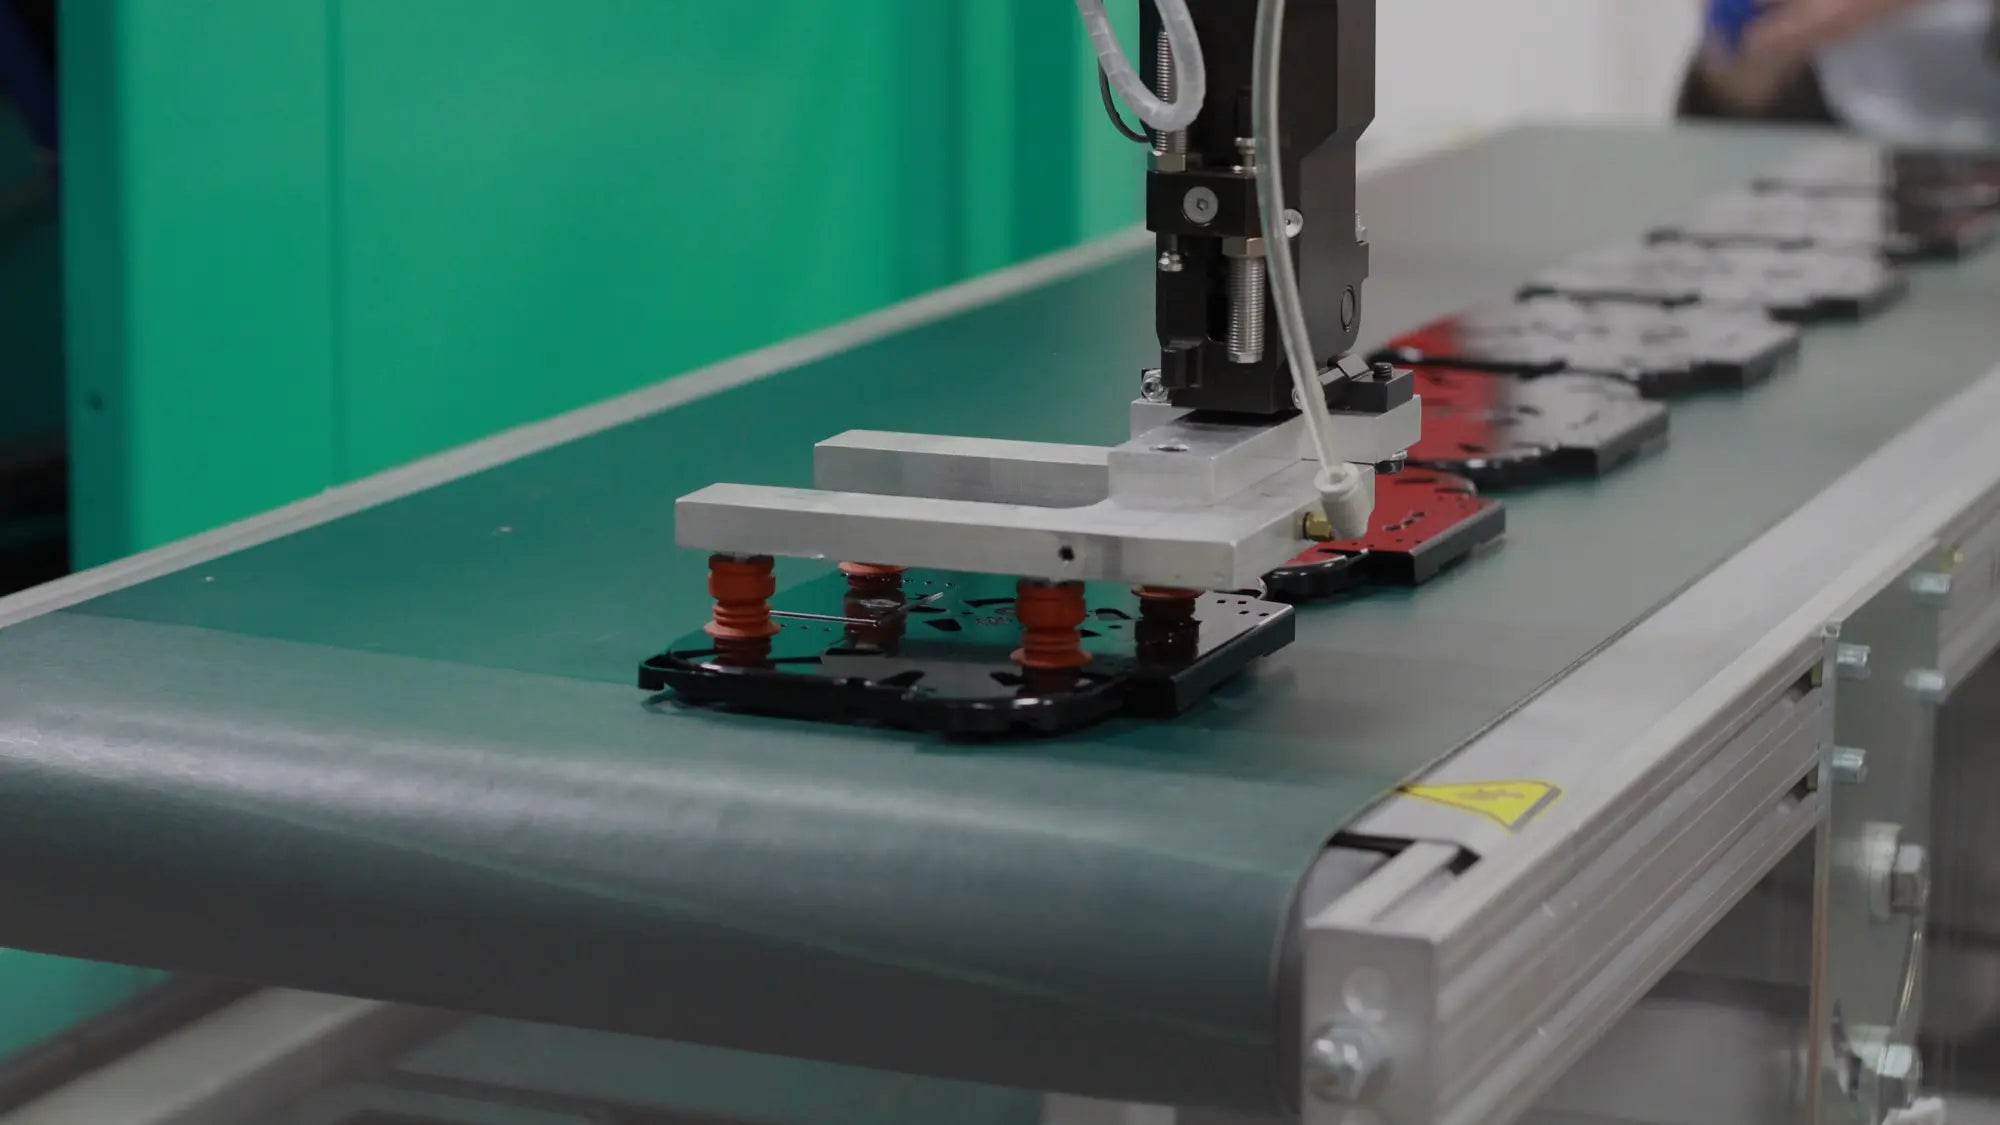 Automated injection molding robot handling parts on a conveyor belt.